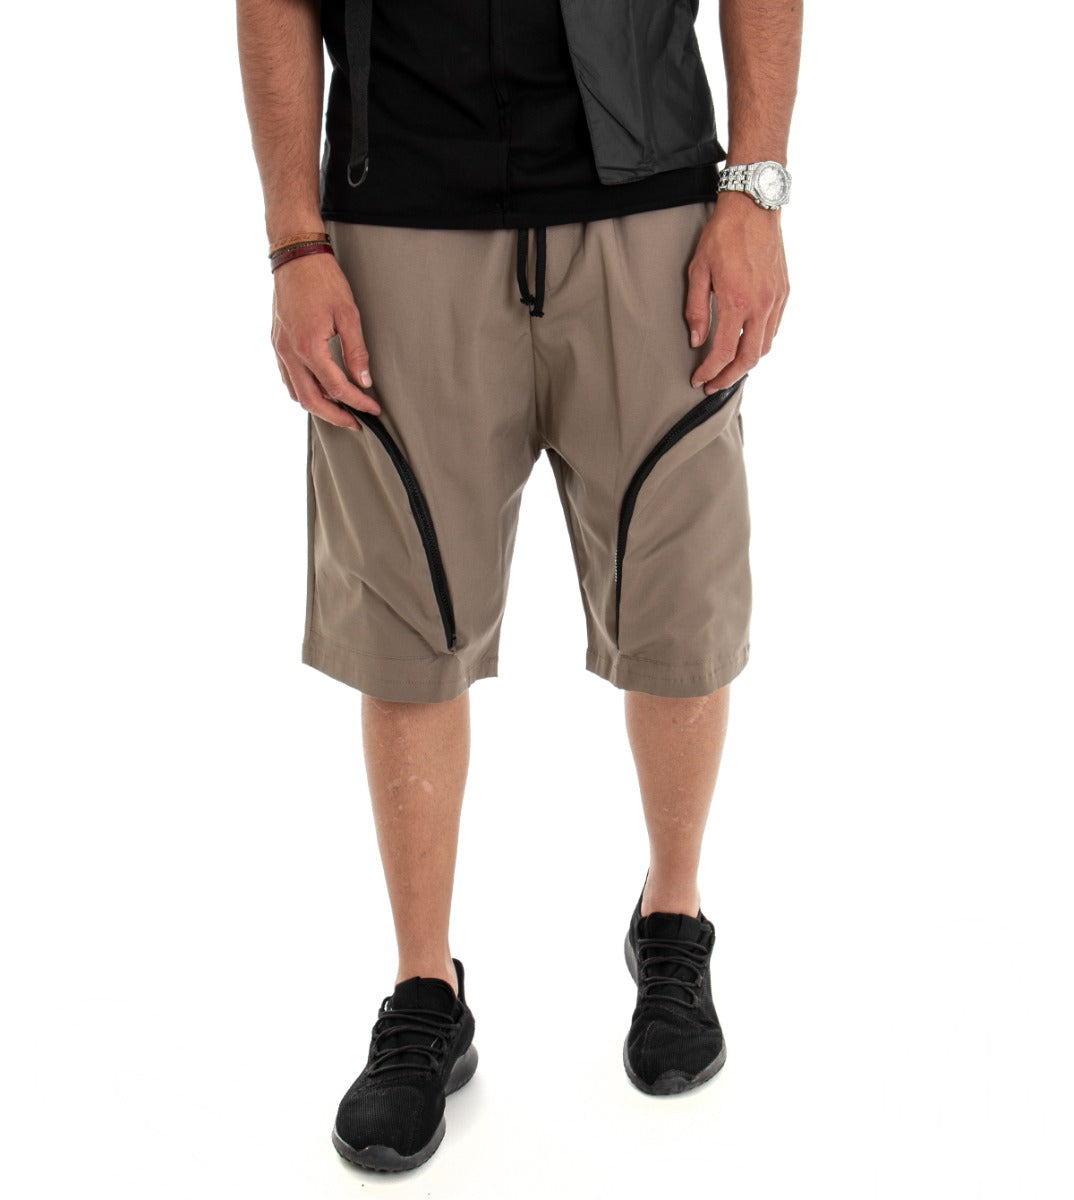 Bermuda Short Men's Shorts Solid Color Over Mud GIOSAL-PC1476A